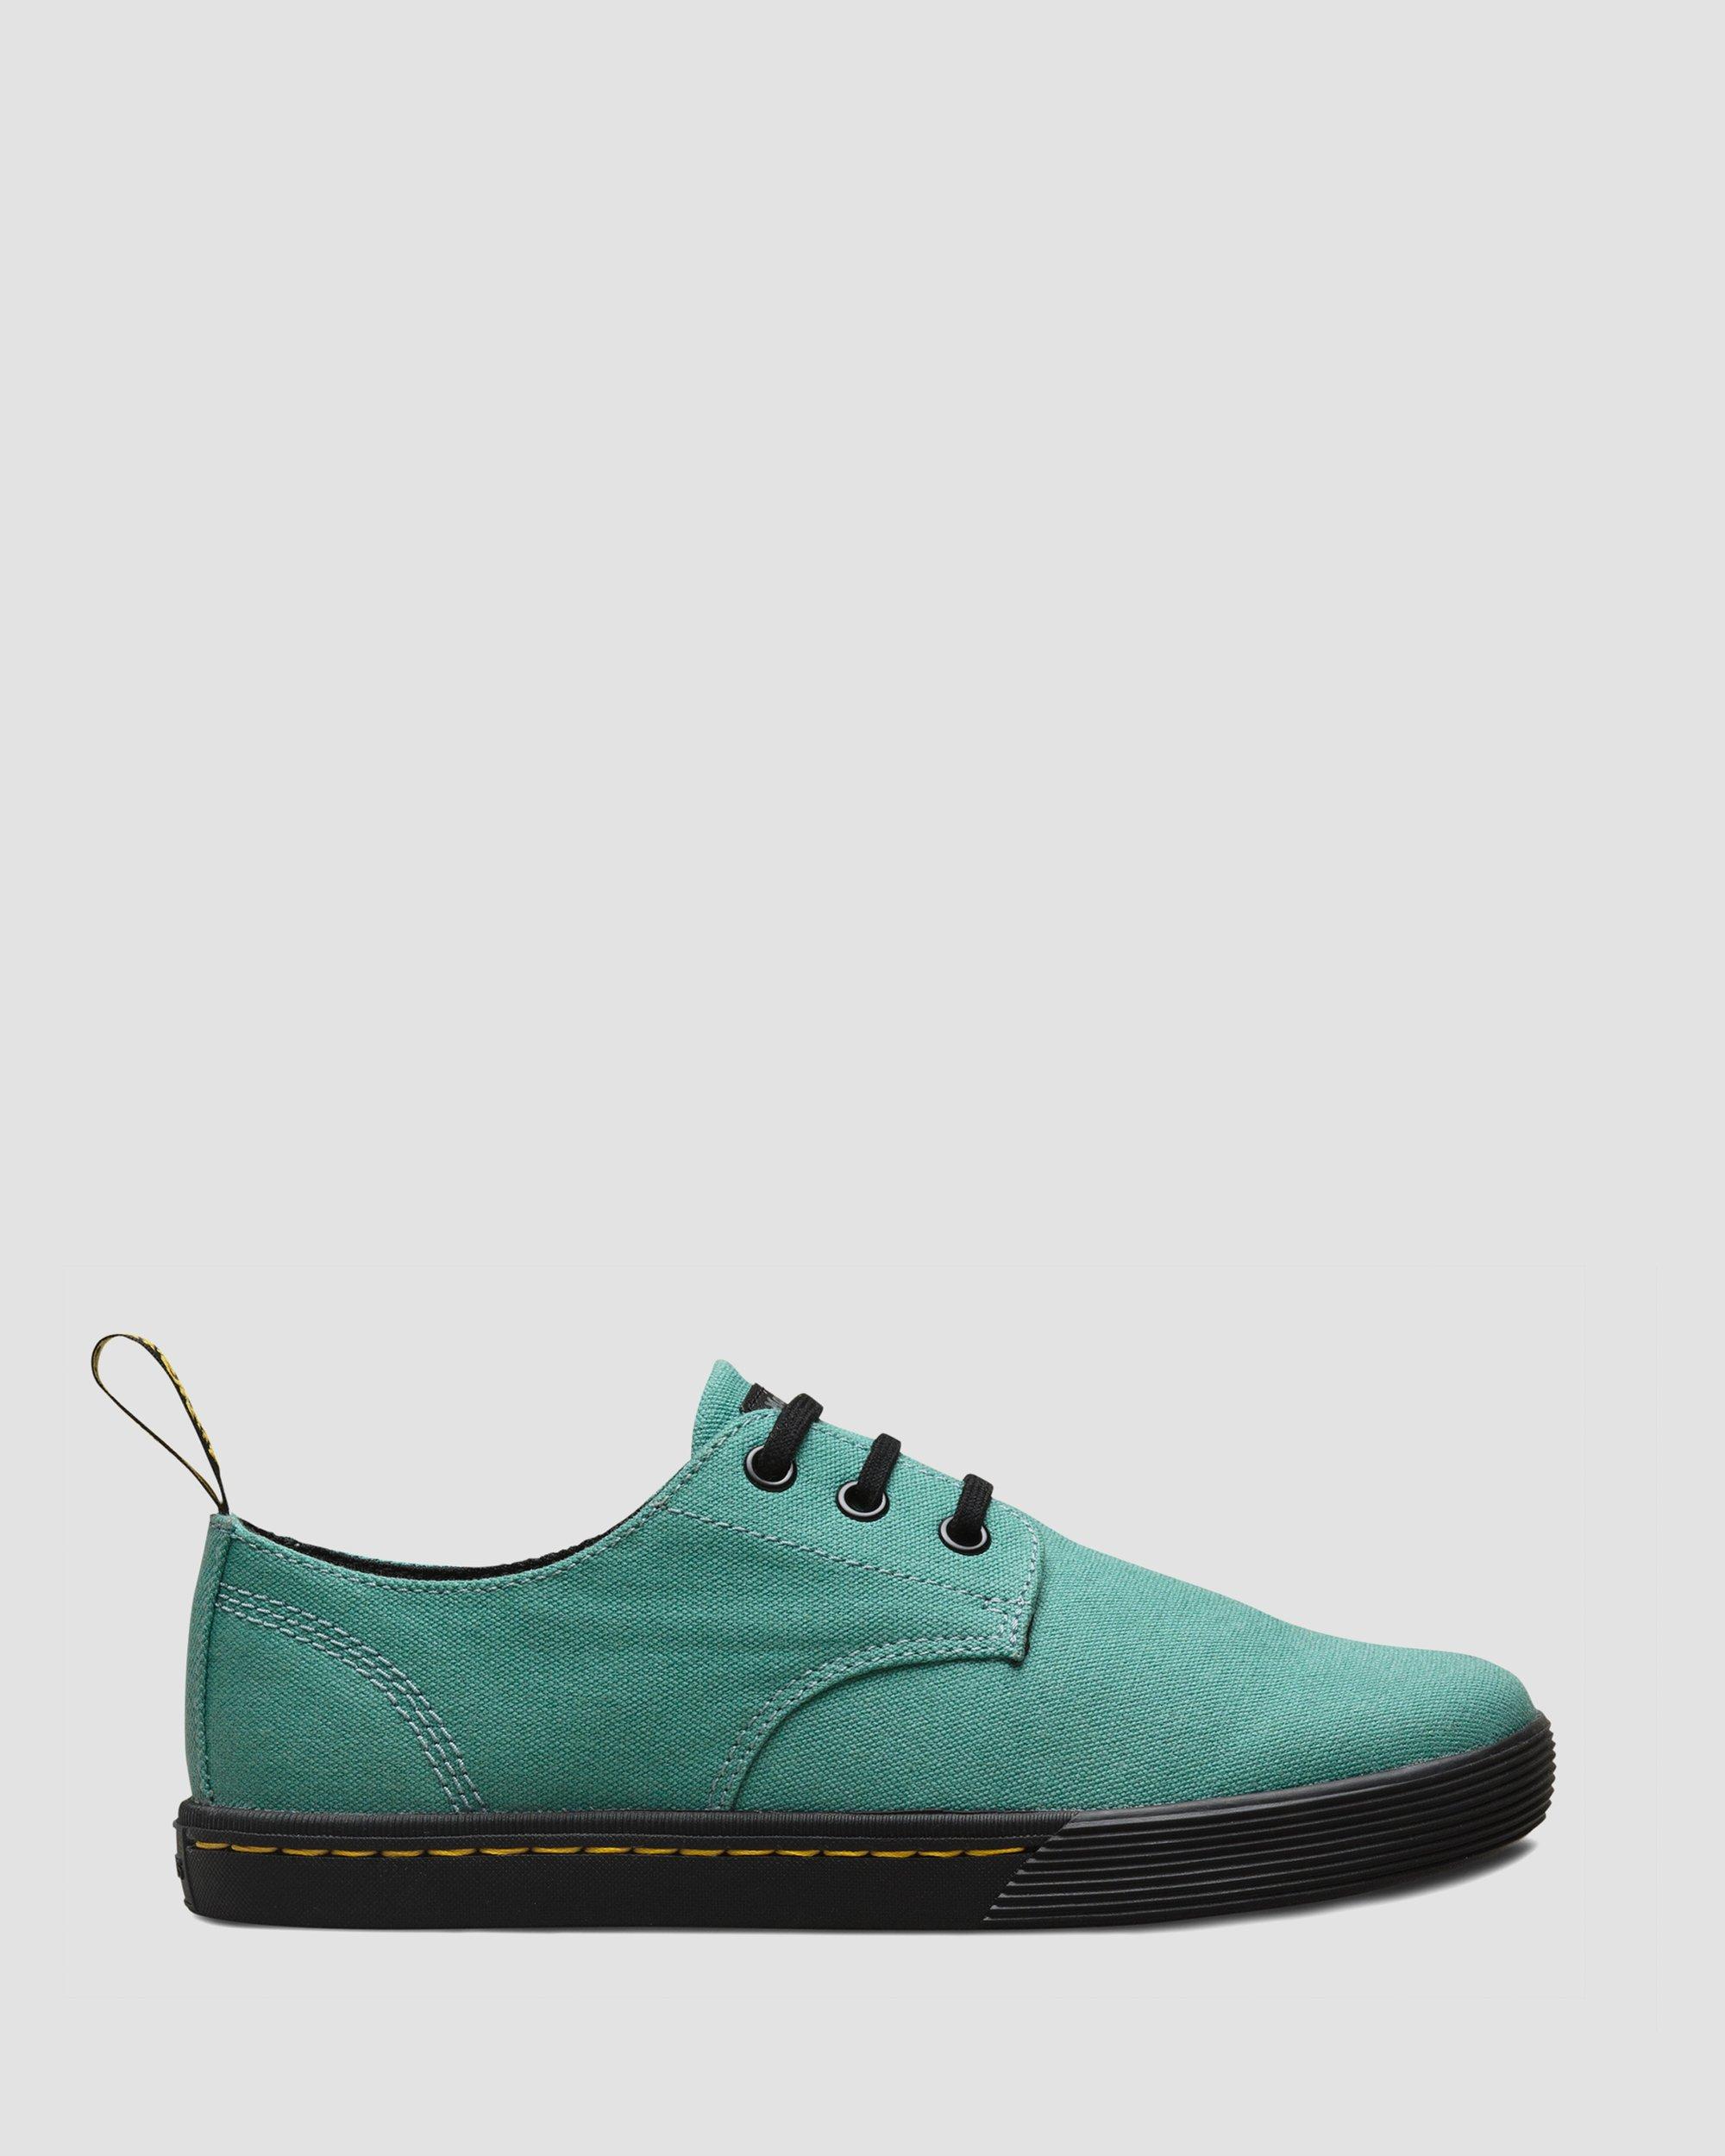 Santanita Women's Canvas Casual Shoes in Pale Teal